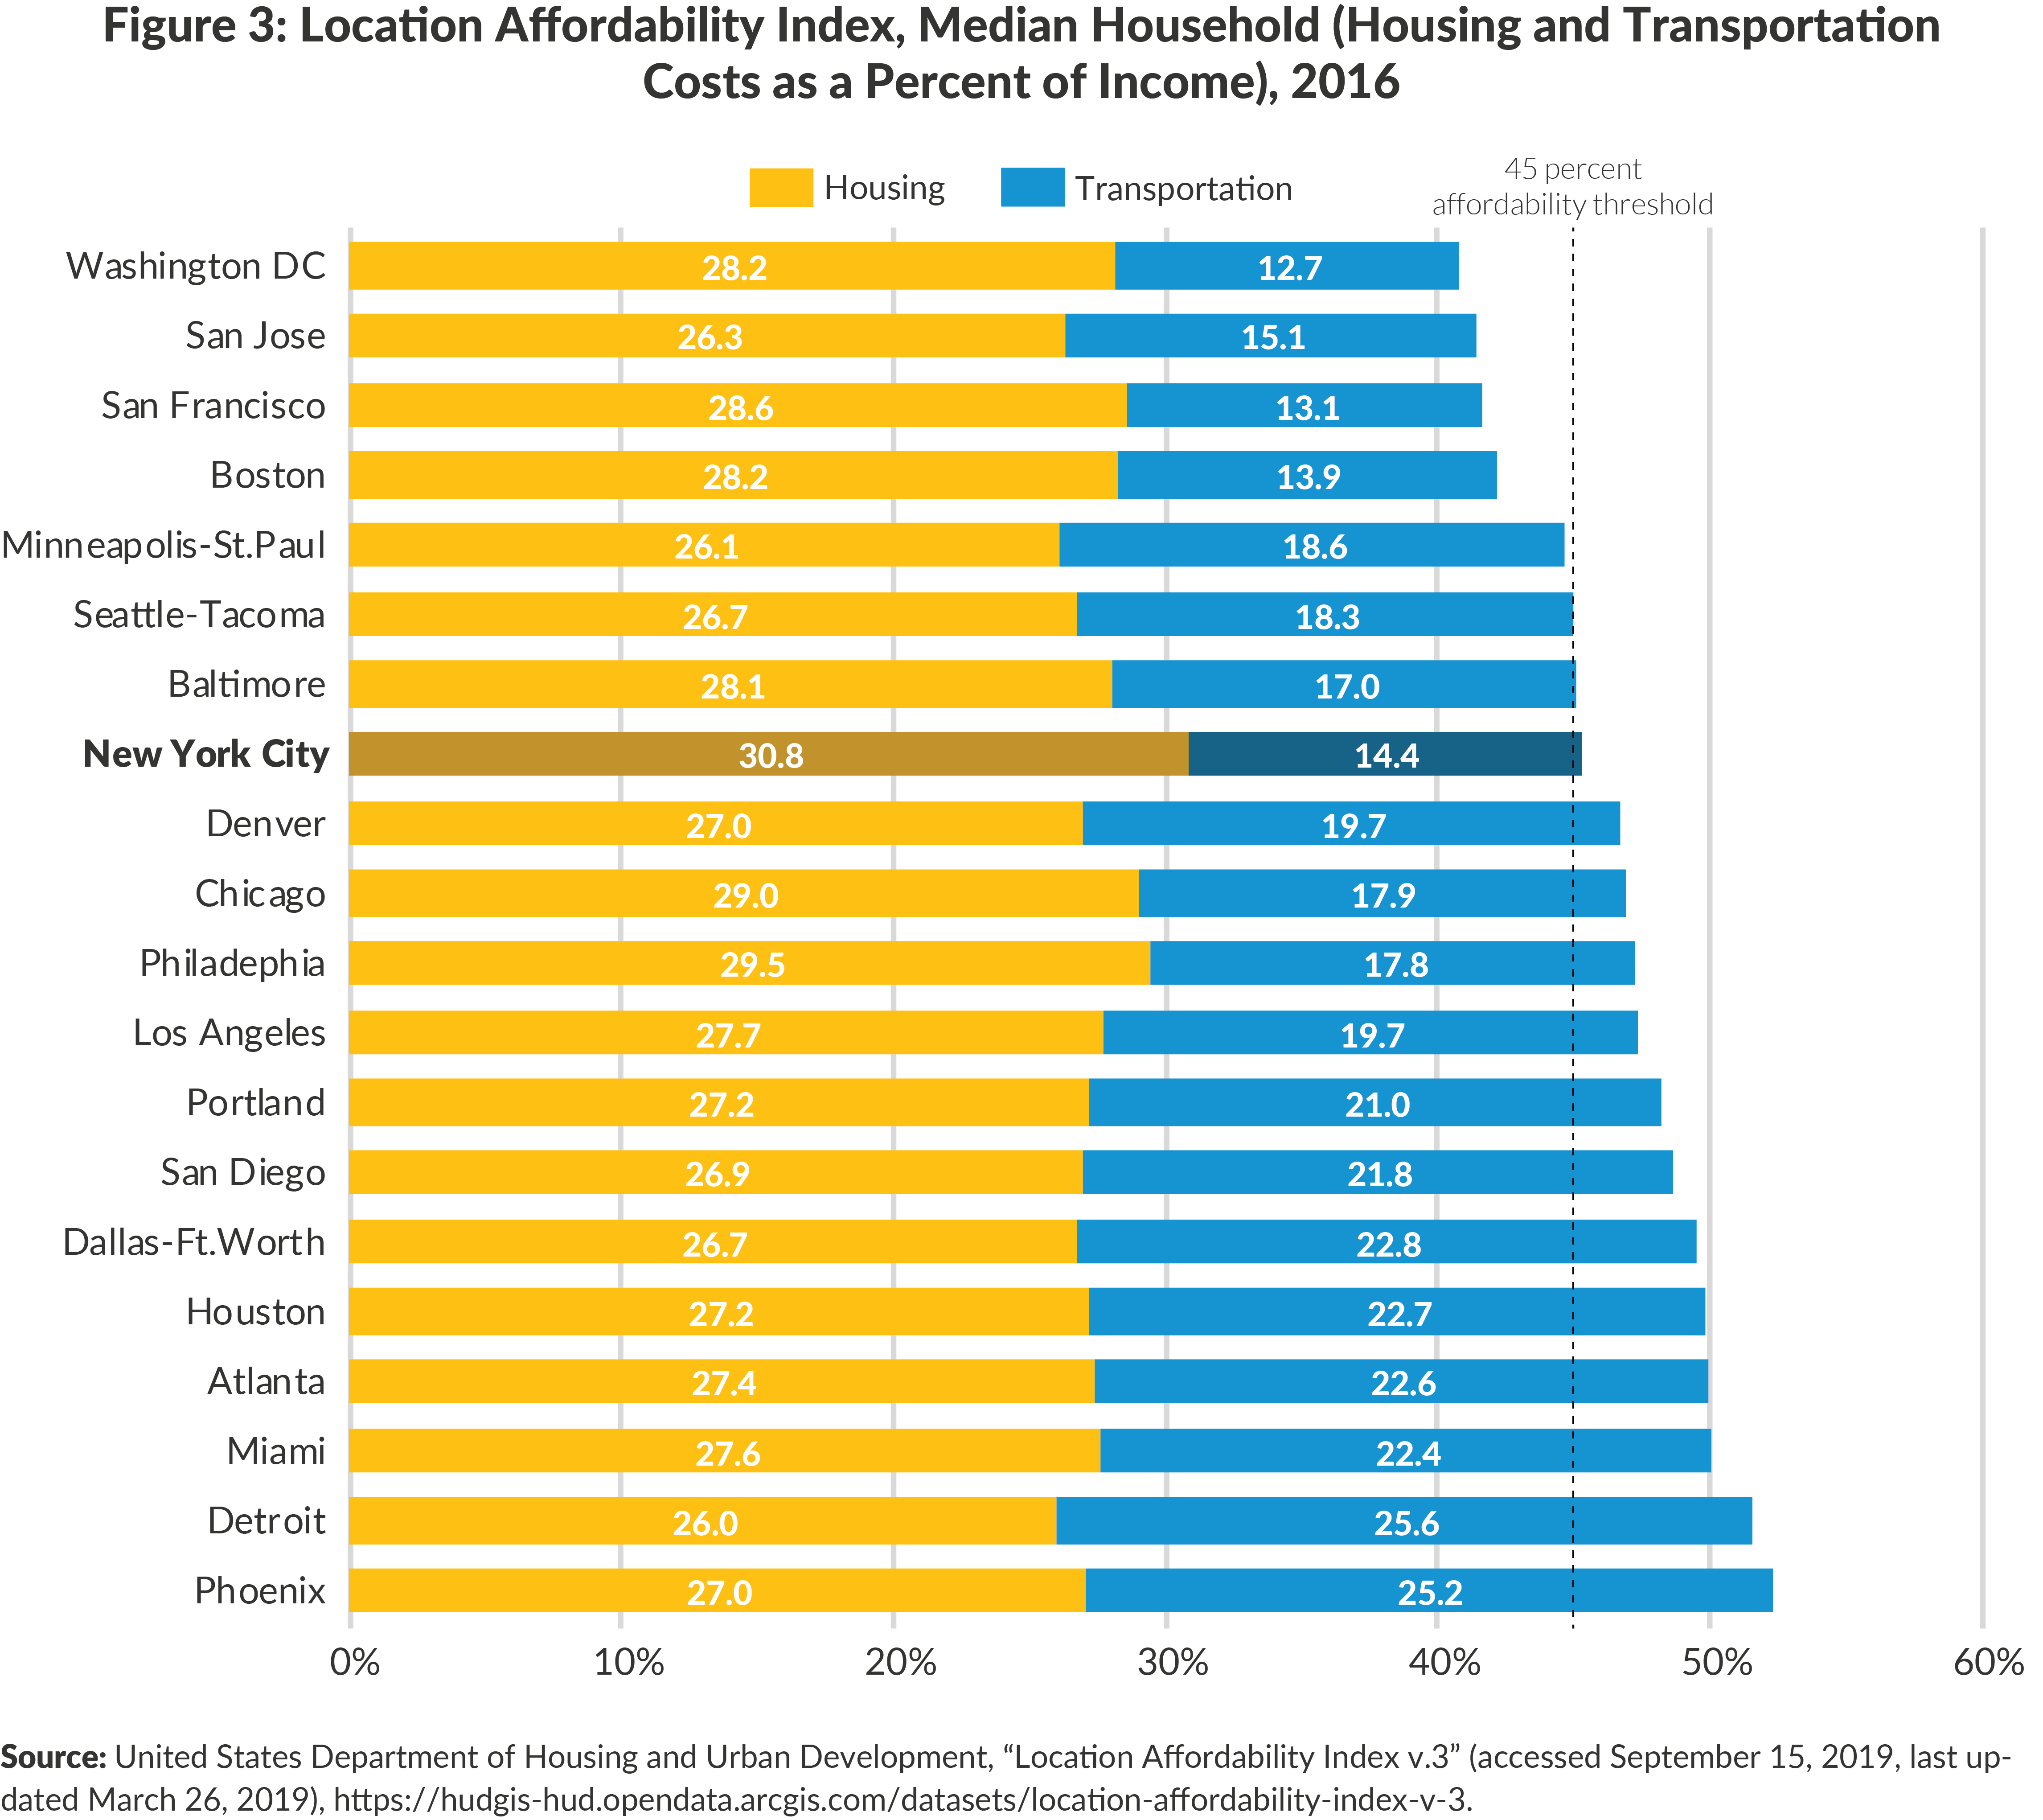 Figure 3. Location Affordability Index, Median Household (Housing and Transportation Costs as a Percent of Income), 2016